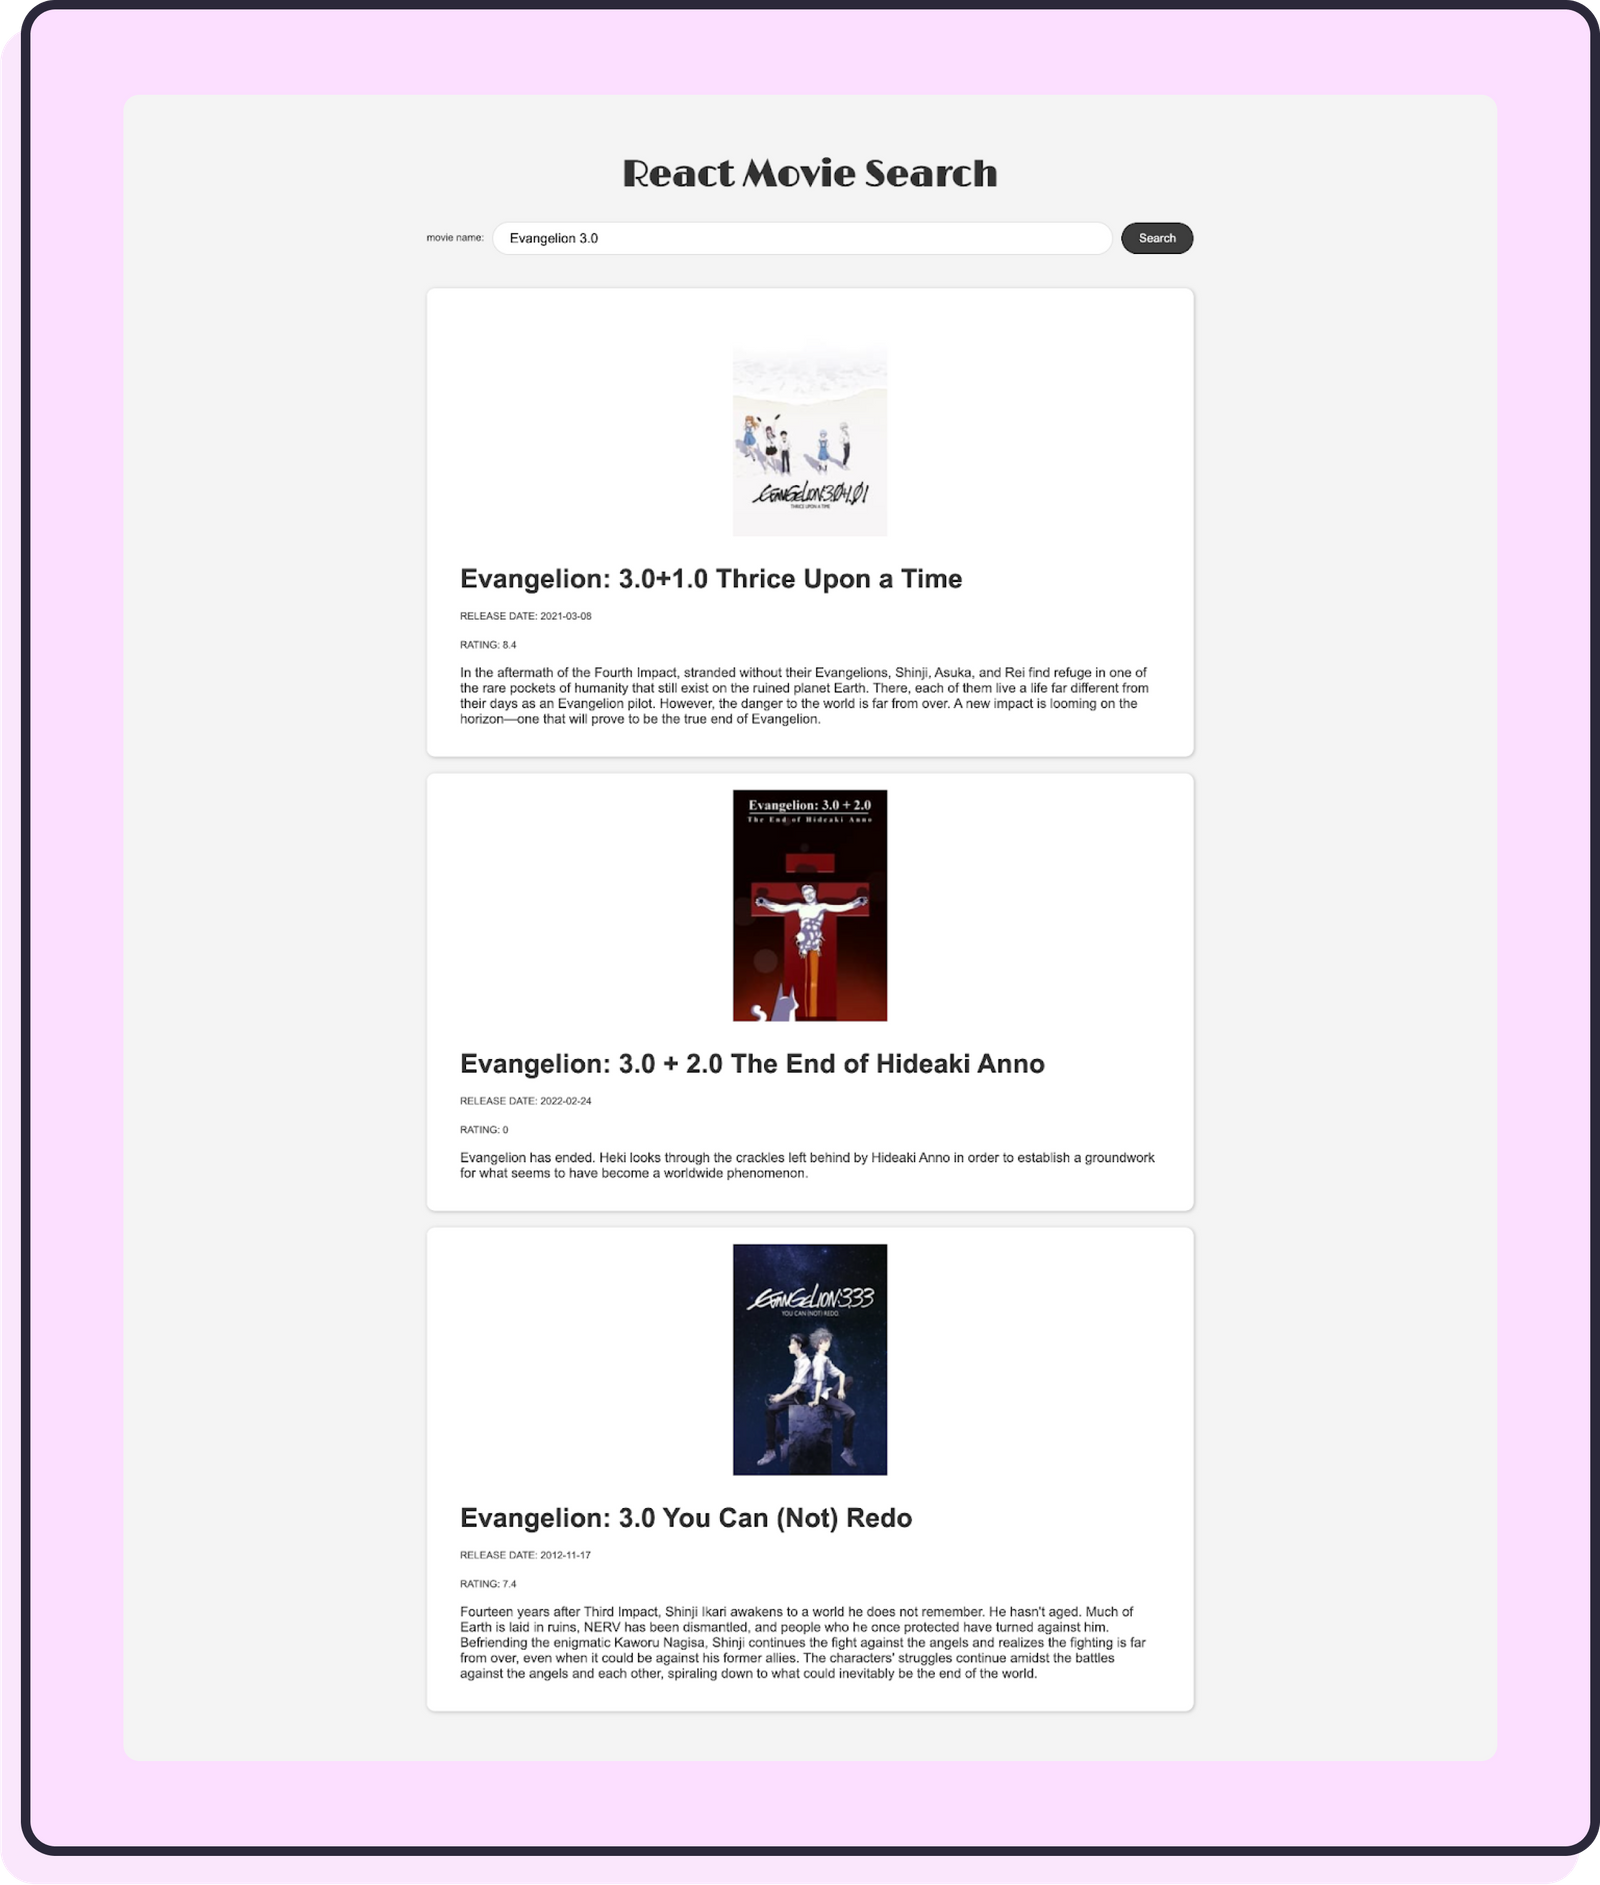 A website entitled React Movie Search displaying results for the search Evangelion 3.0. Each result has the movie poster, title, release date, rating, and description.